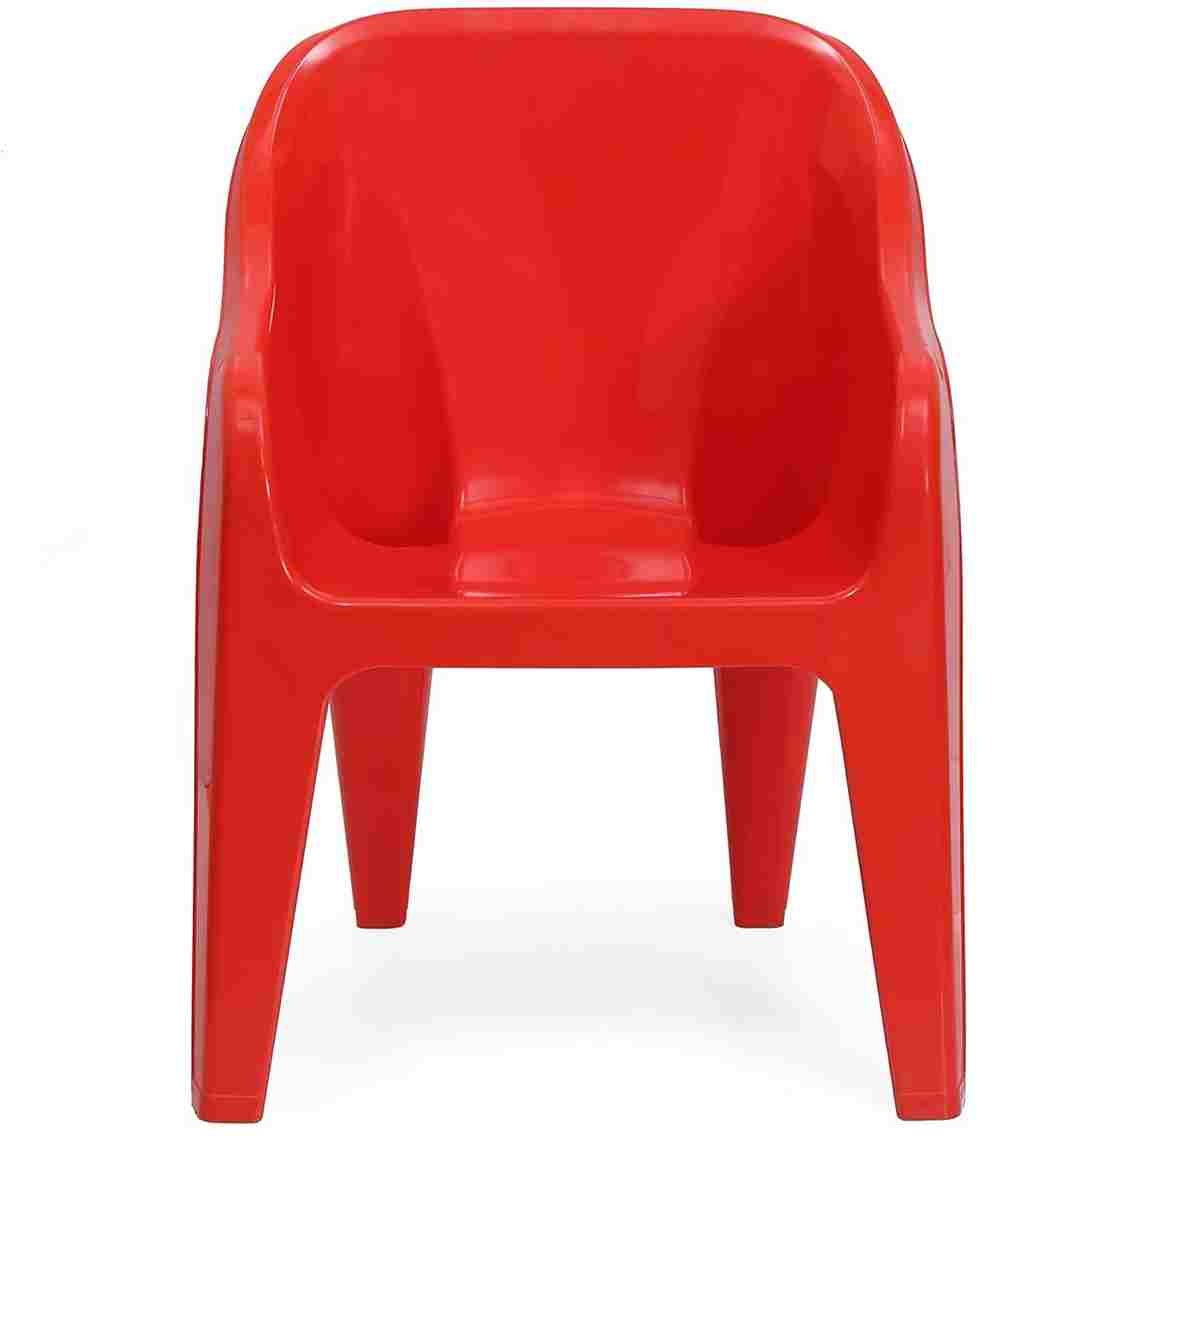 kids chair red color study, play front view 1